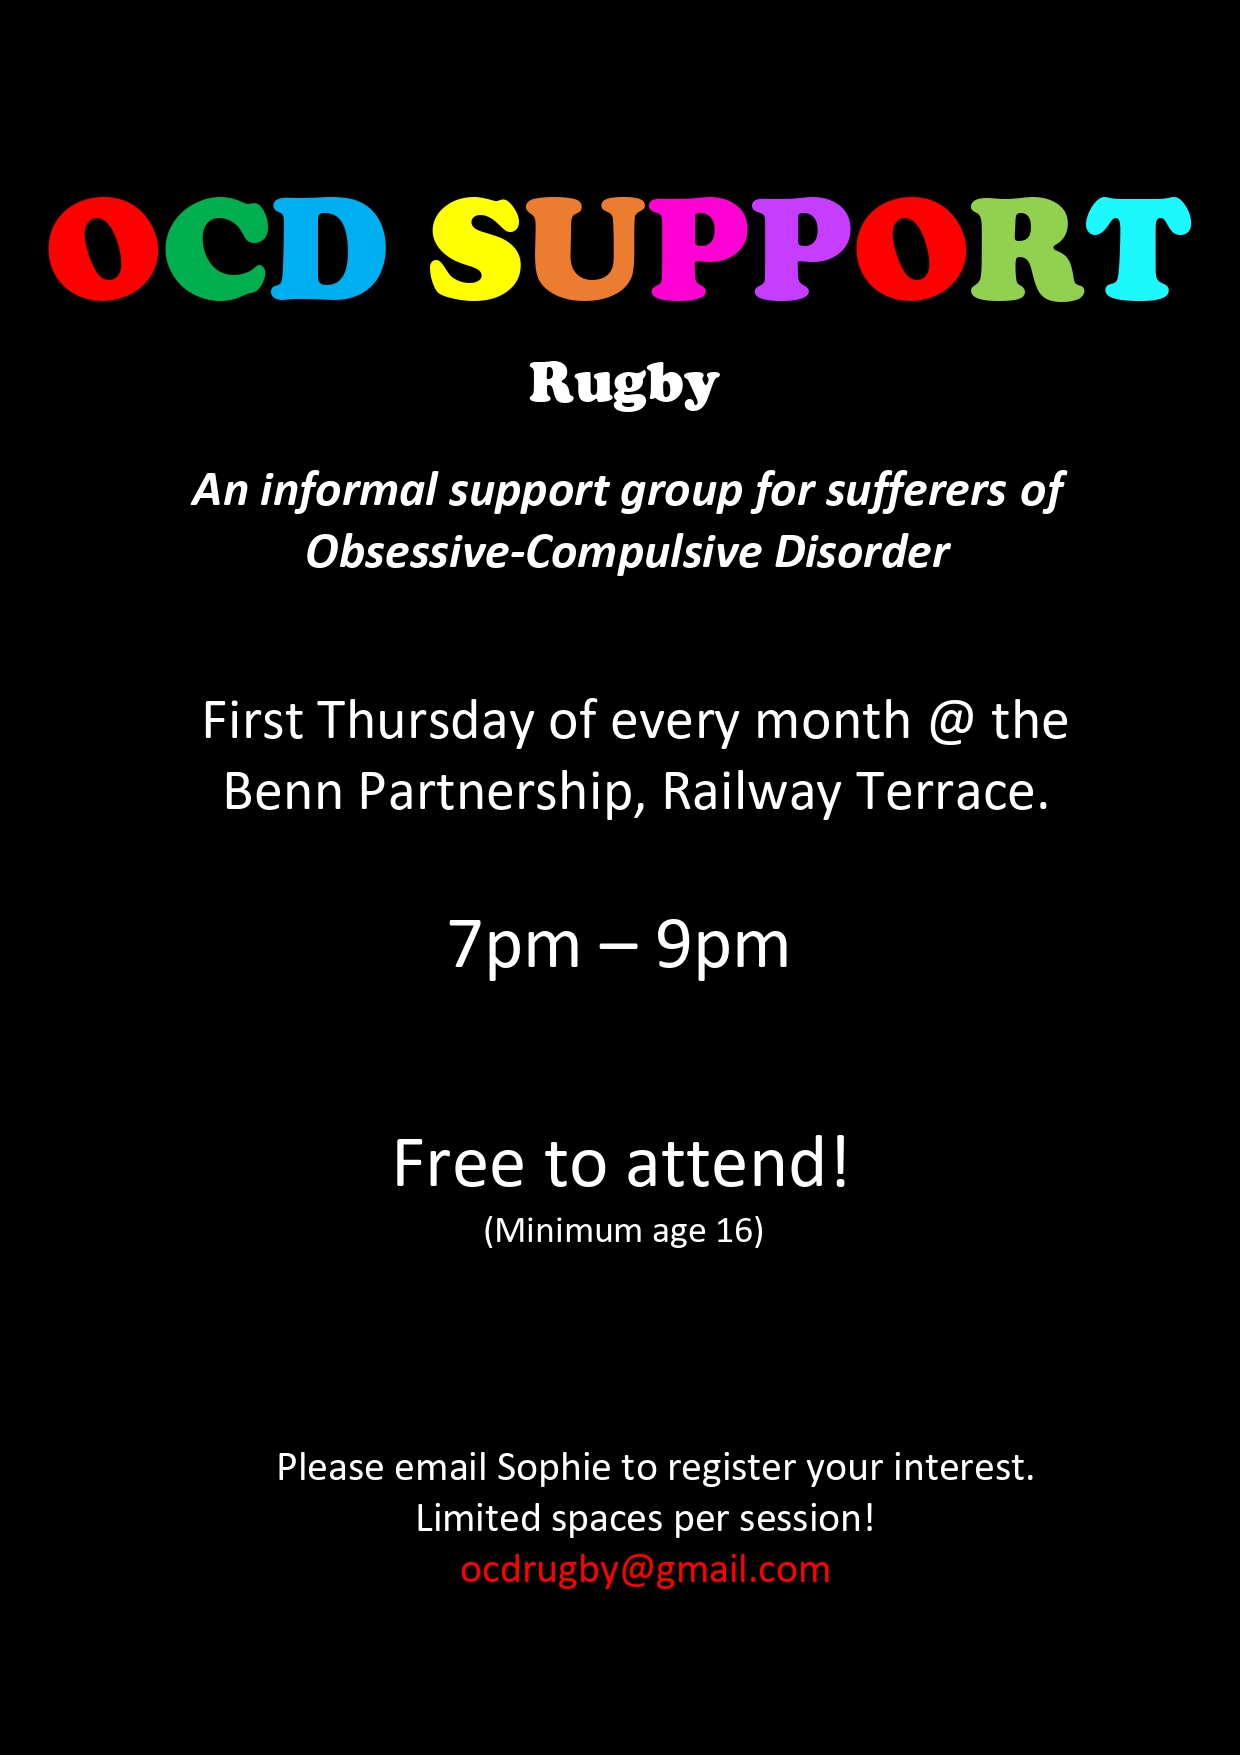 OCD SUPPORT - Rugby